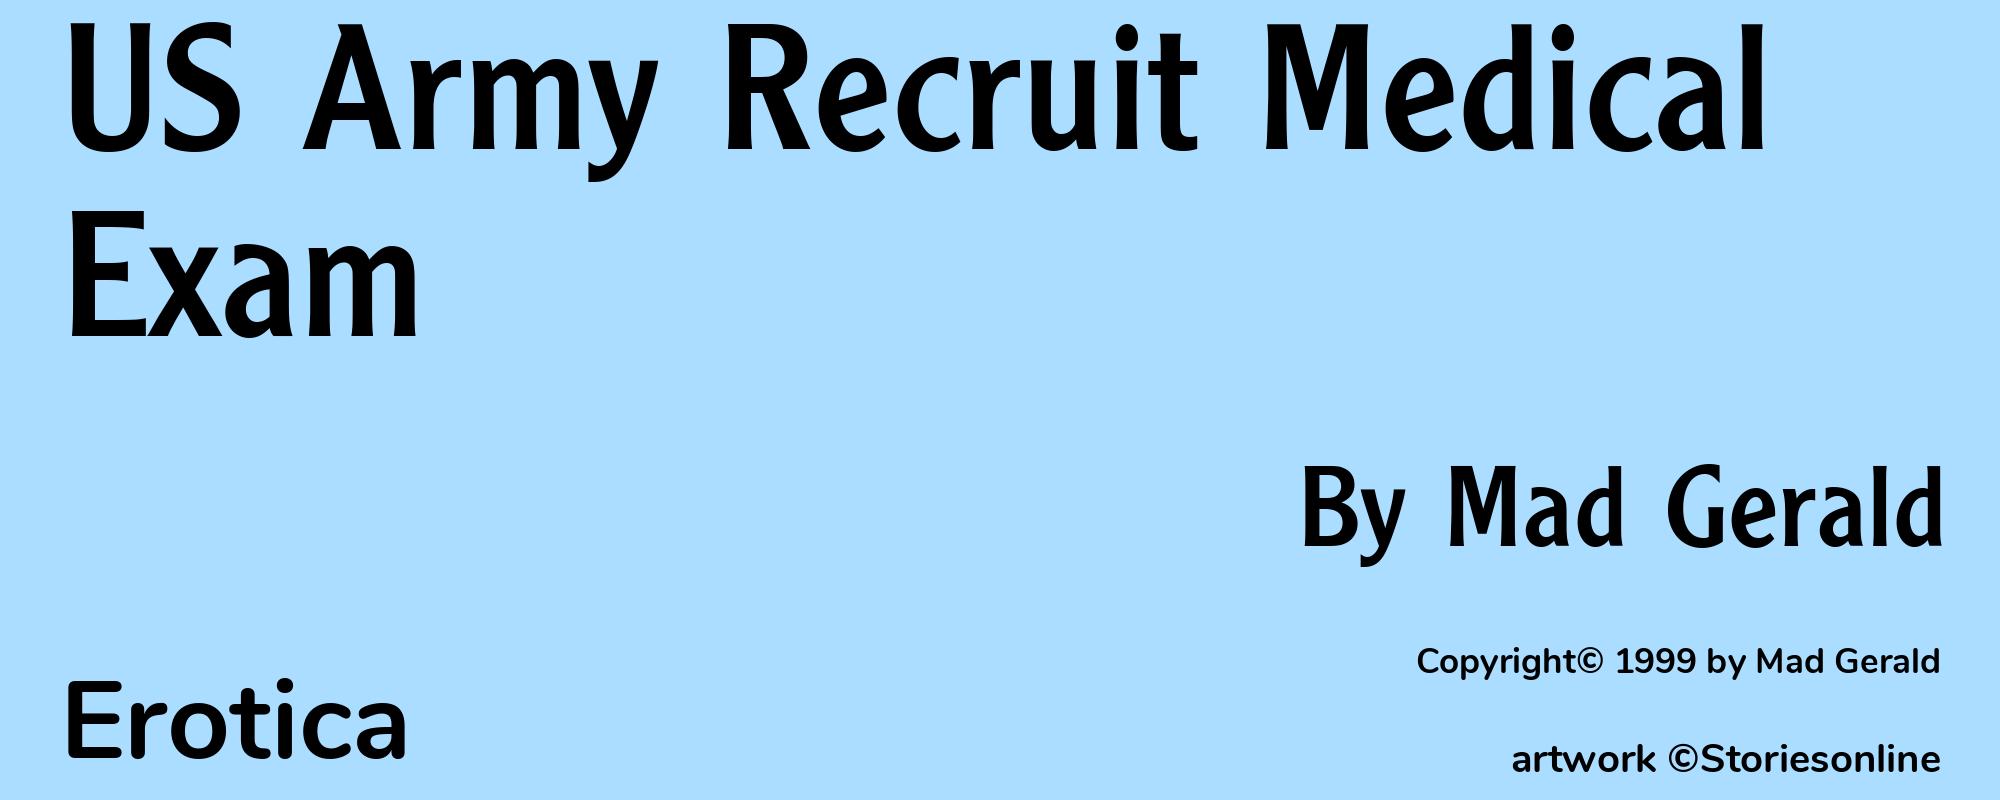 US Army Recruit Medical Exam - Cover